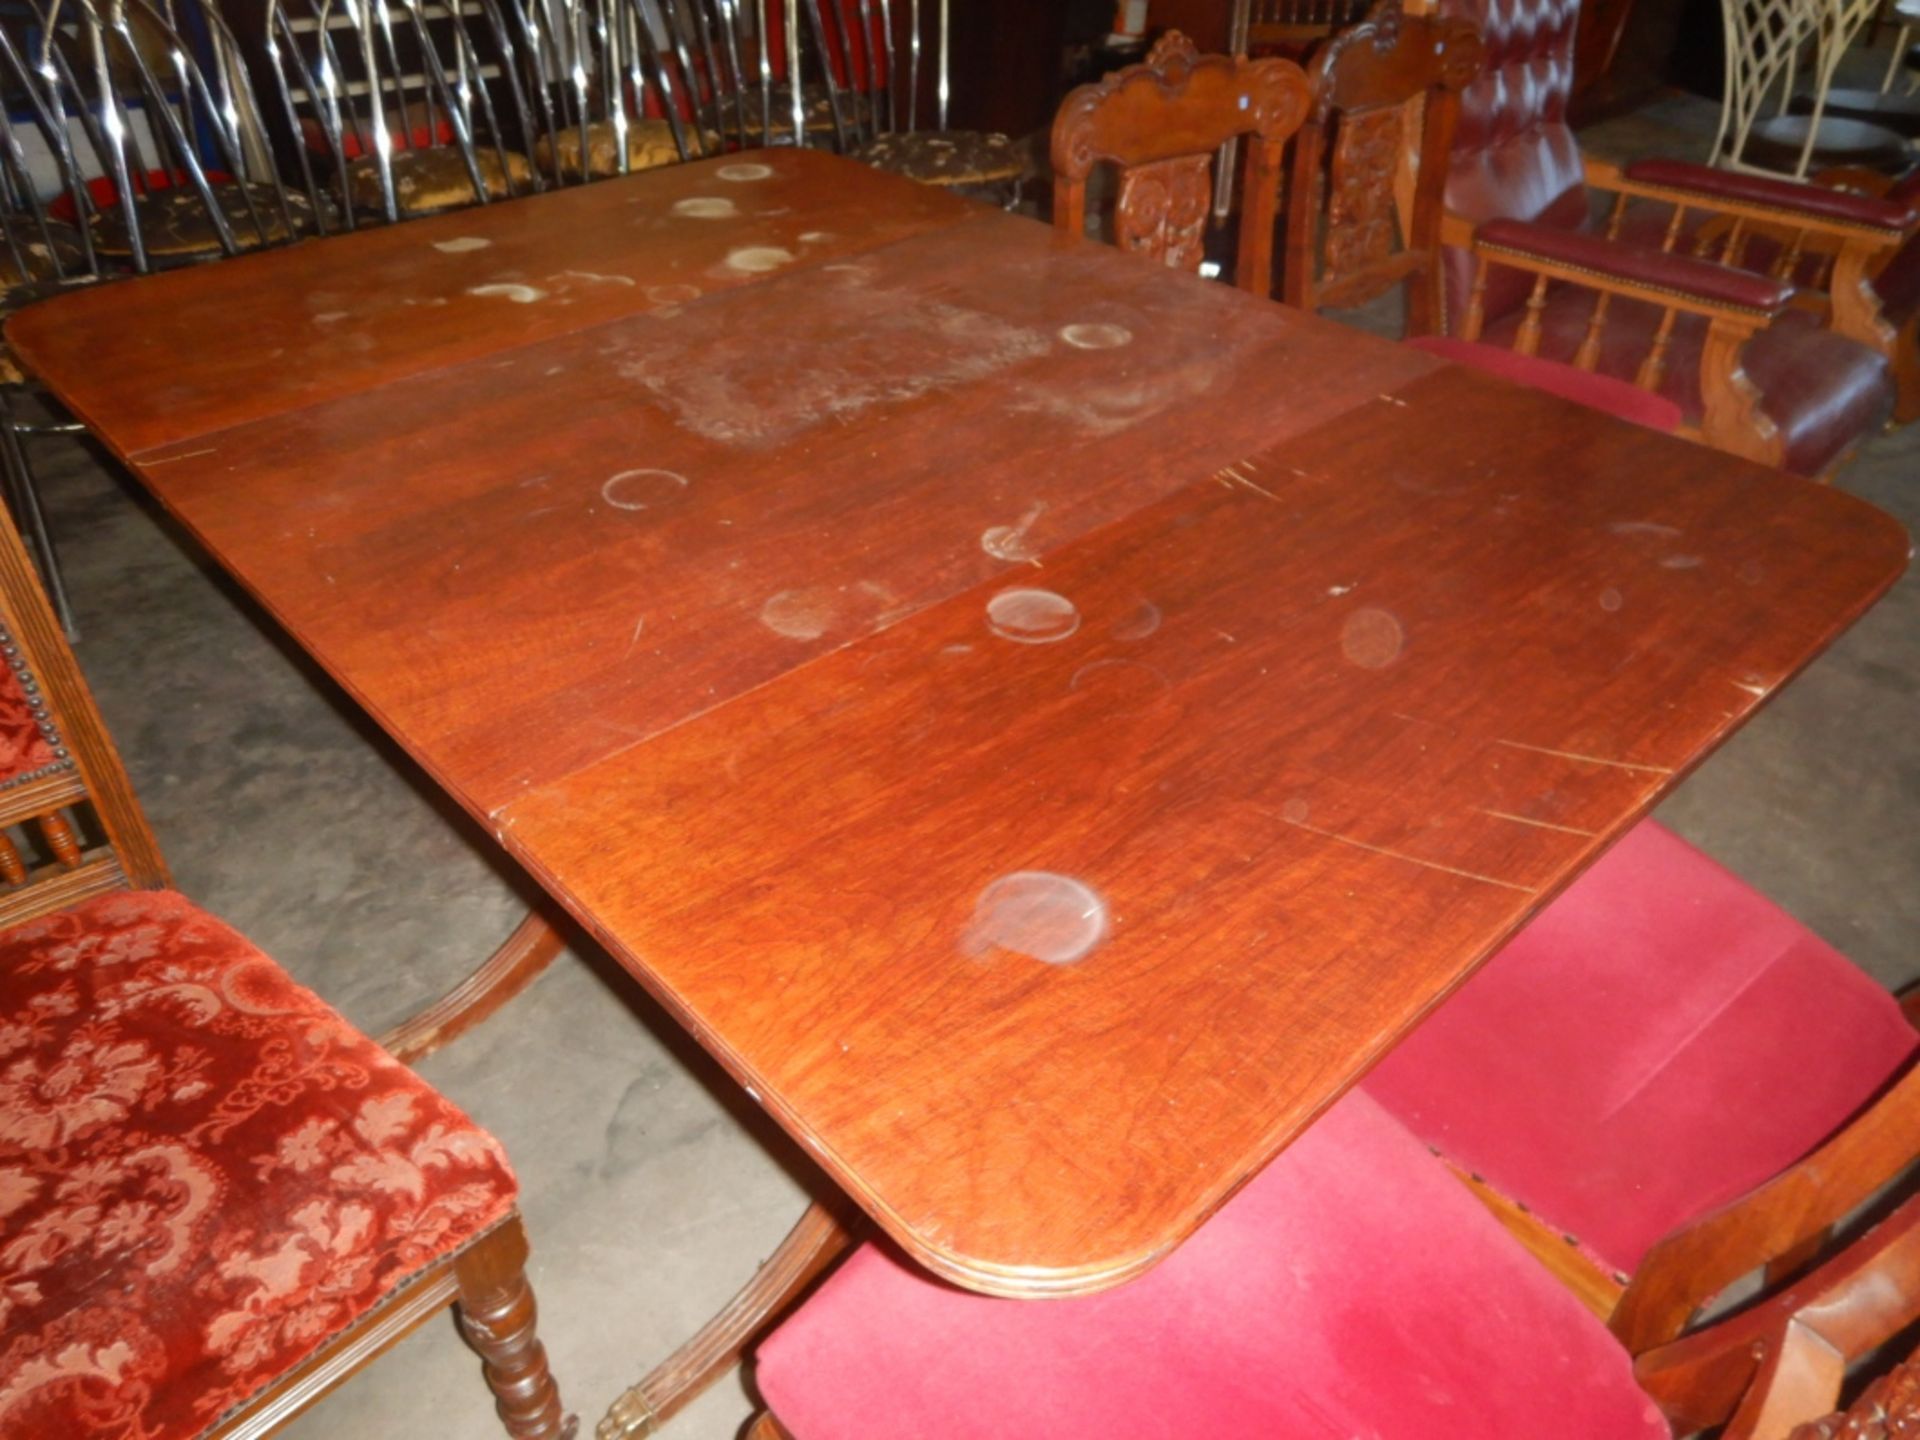 ANTIQUE DUNCAN PHYFE STYLE DROP LEAF TABLE AND CHAIRS (6) - Image 9 of 16